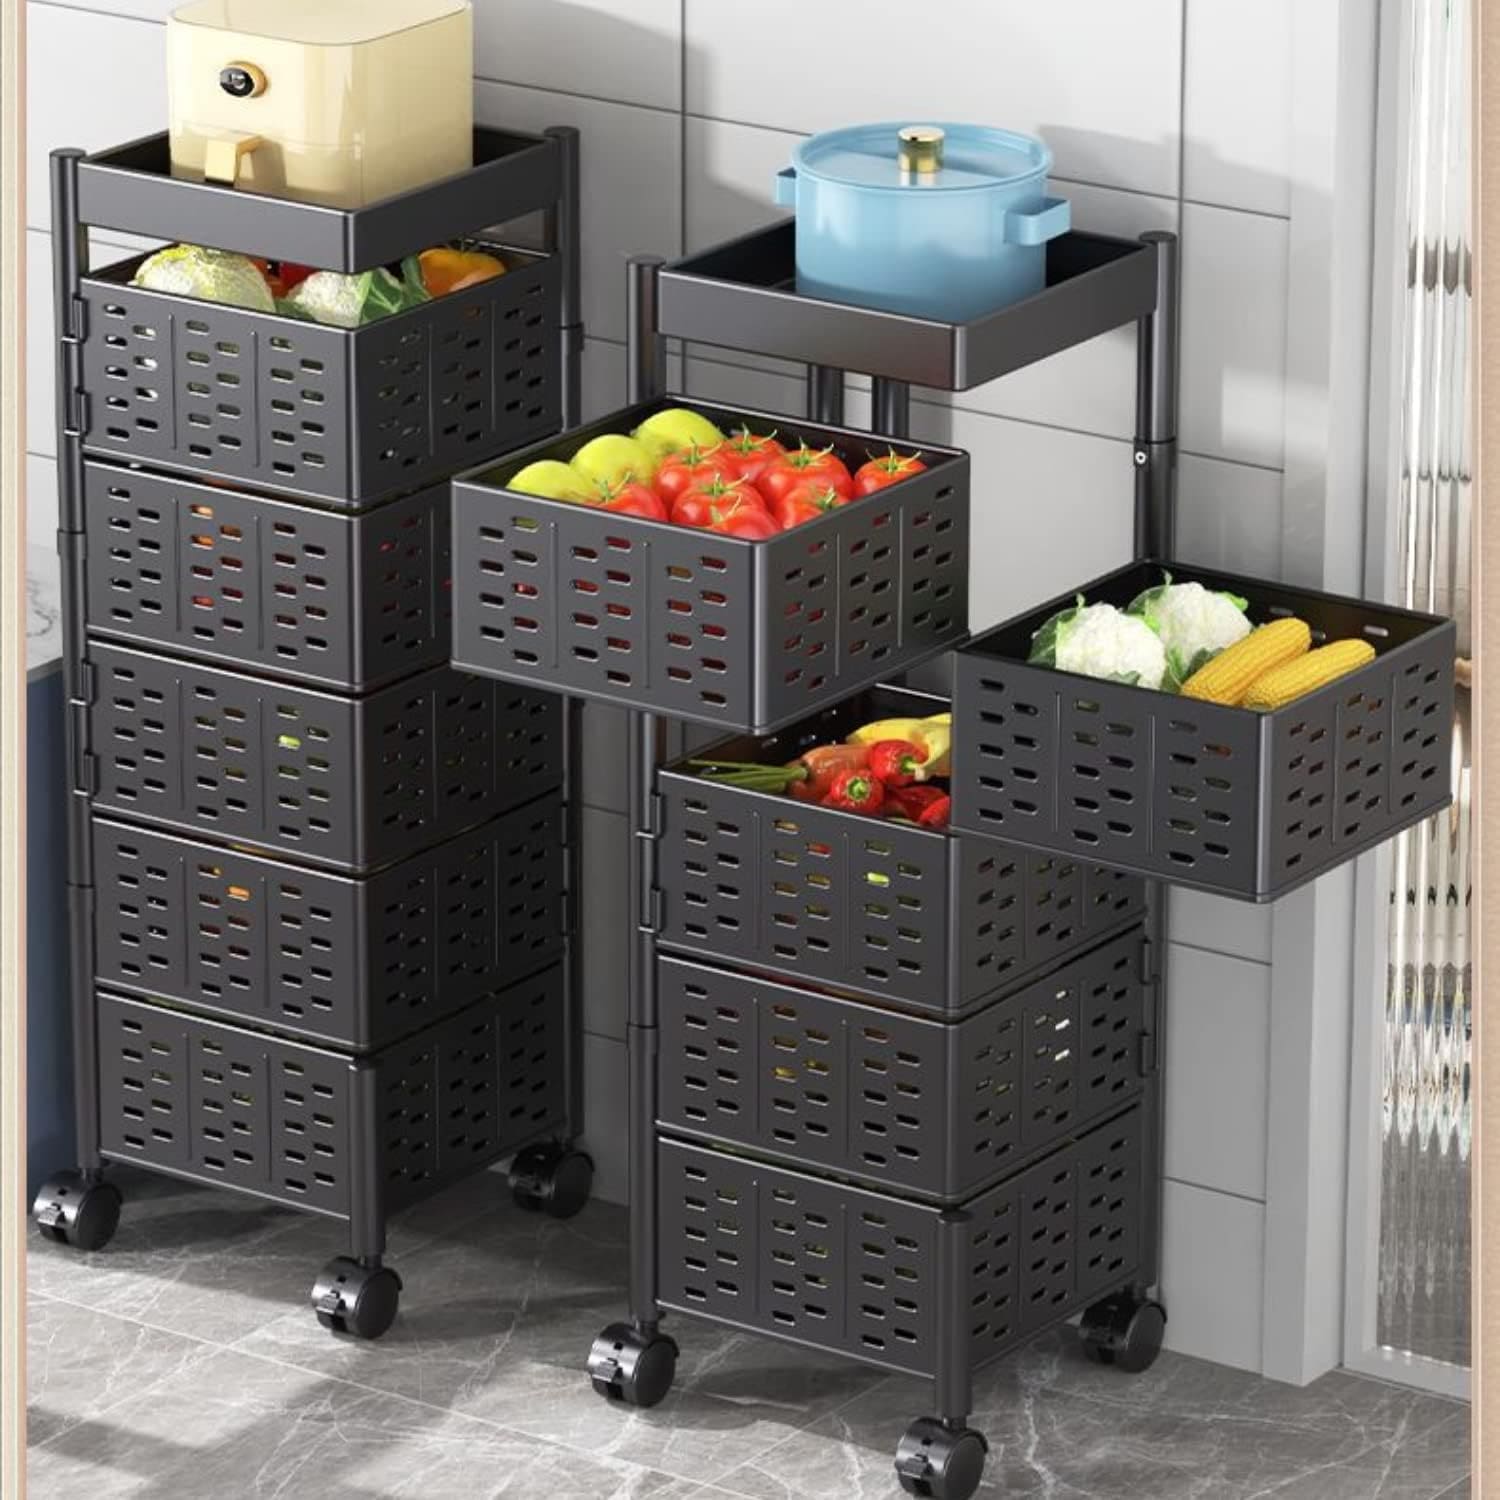 Square Multi Tier Rotating Storage Basket, 360° Rotating Fruit and Vegetable Stand, Kitchen Storage Rack with Mesh Baskets & Wheels, Mobile Kitchen Storage Fruit and Vegetable Holder